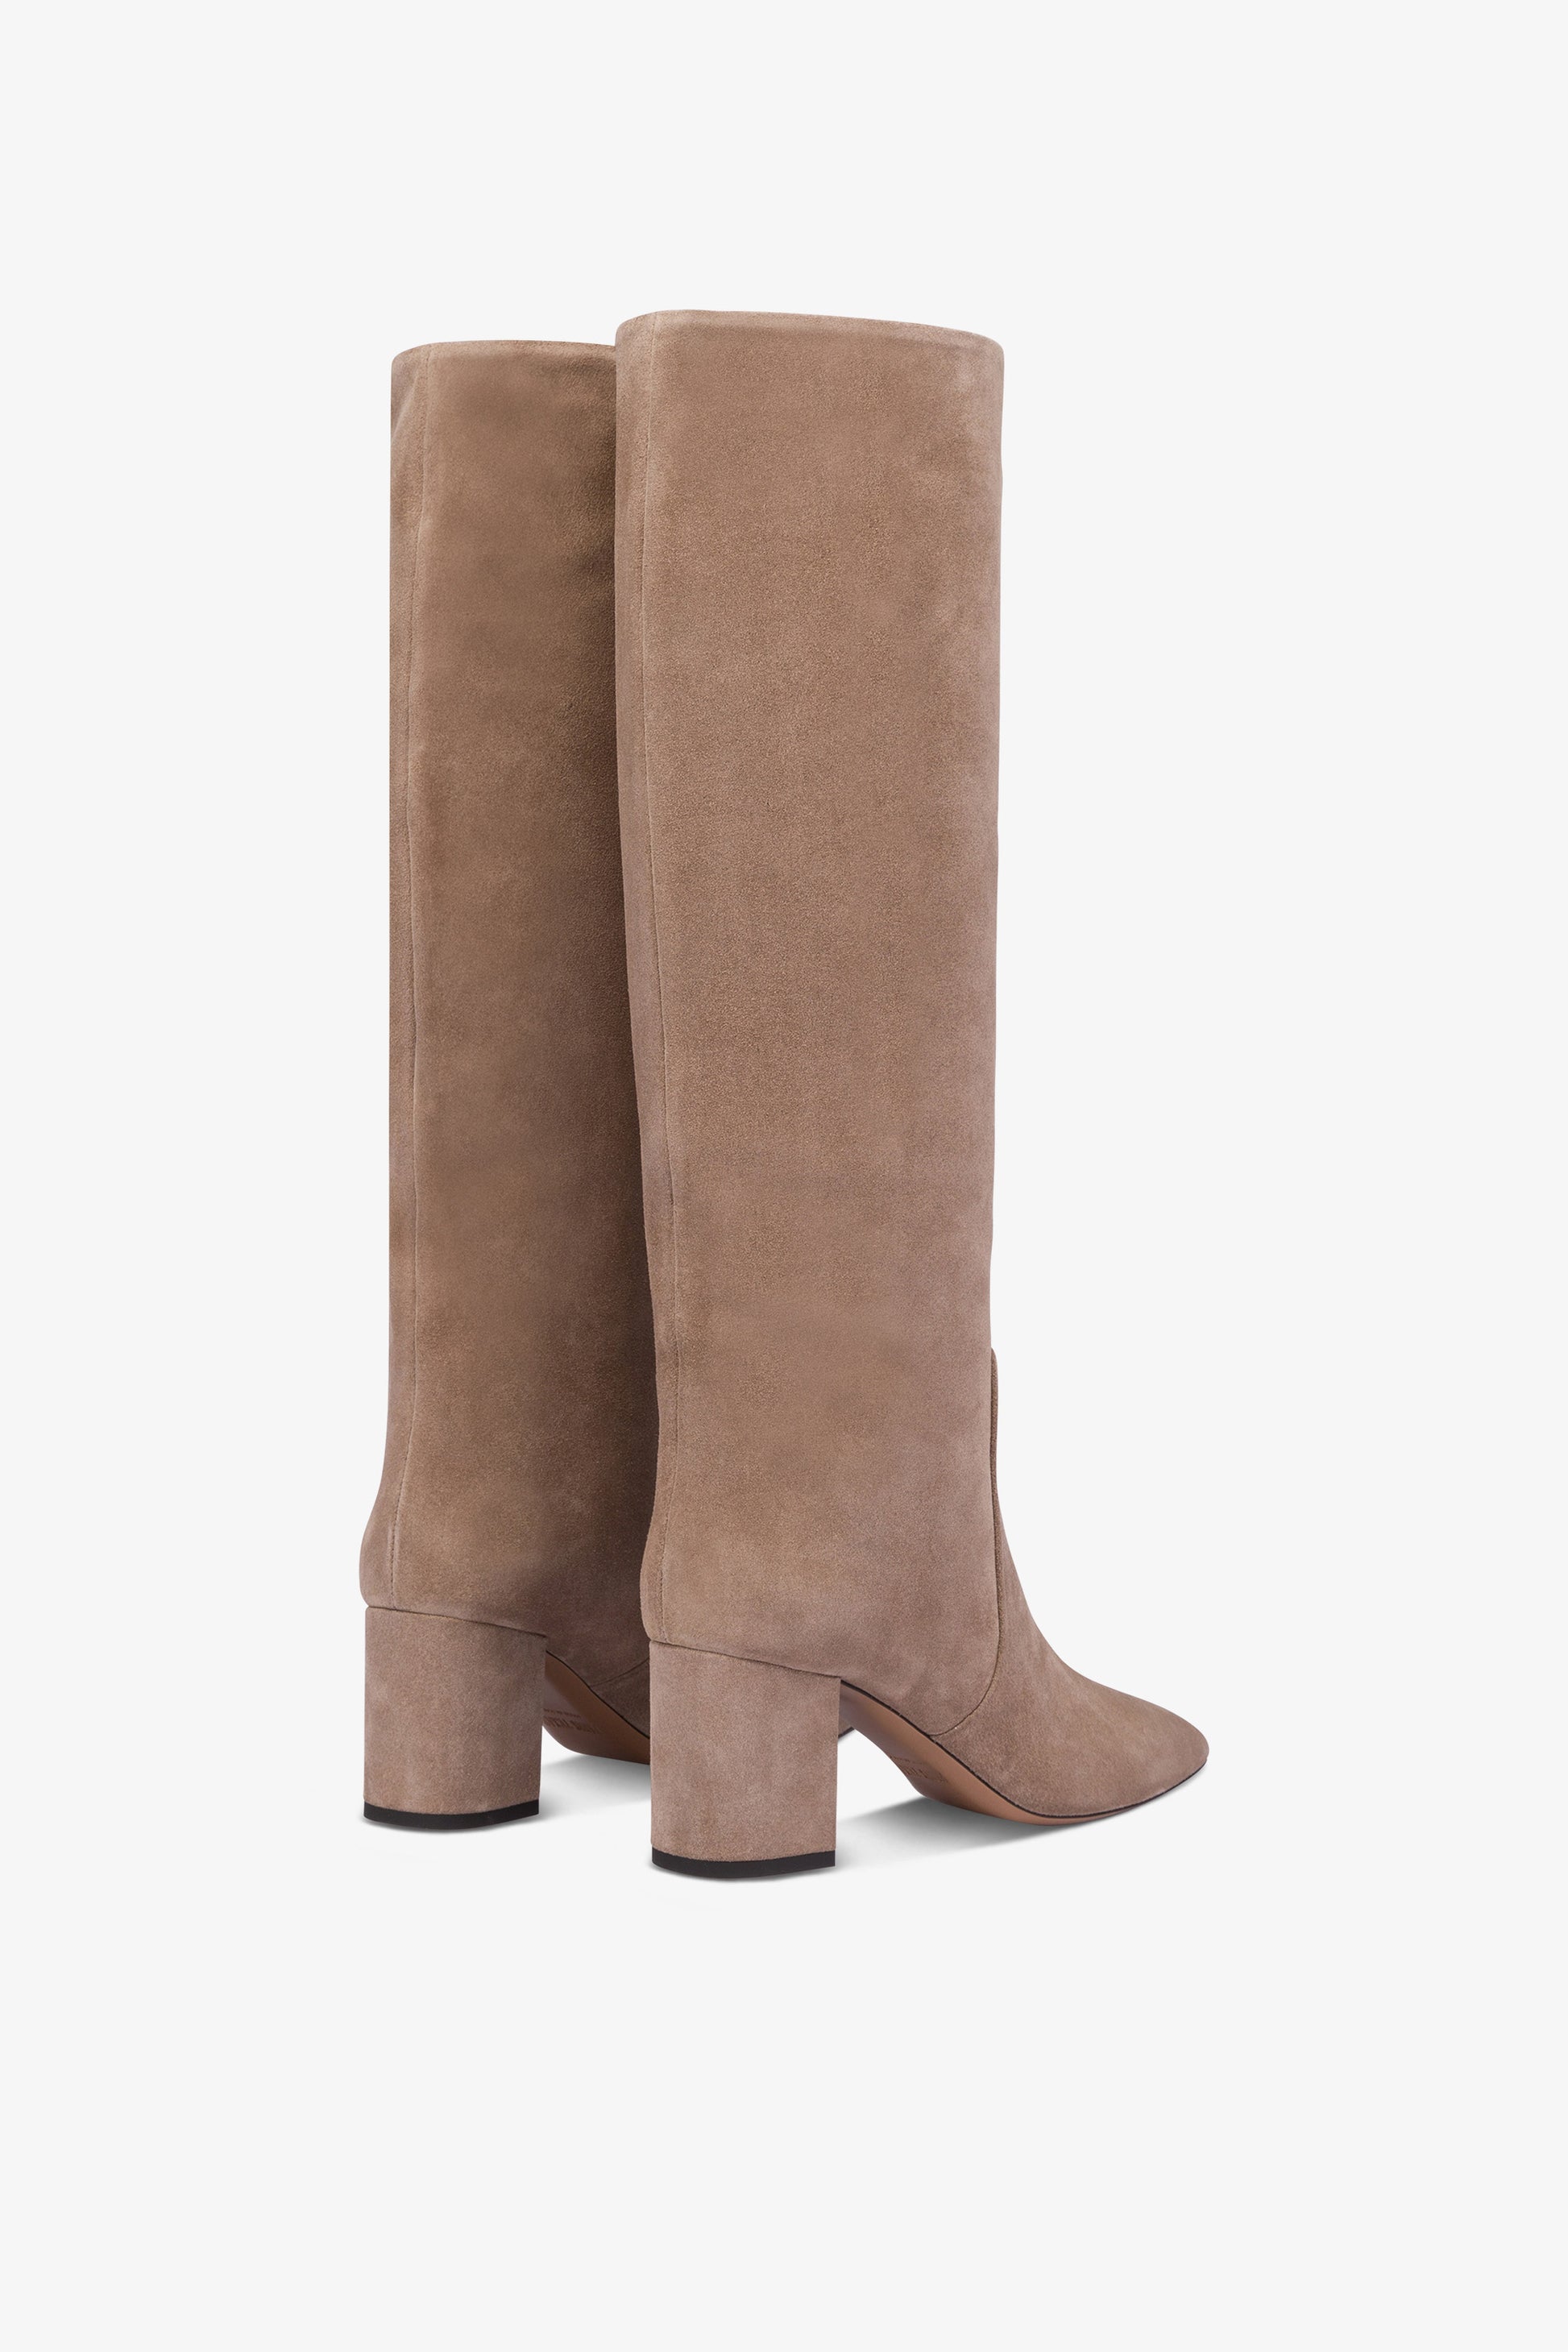 Knee-high boots in soft koala suede leather